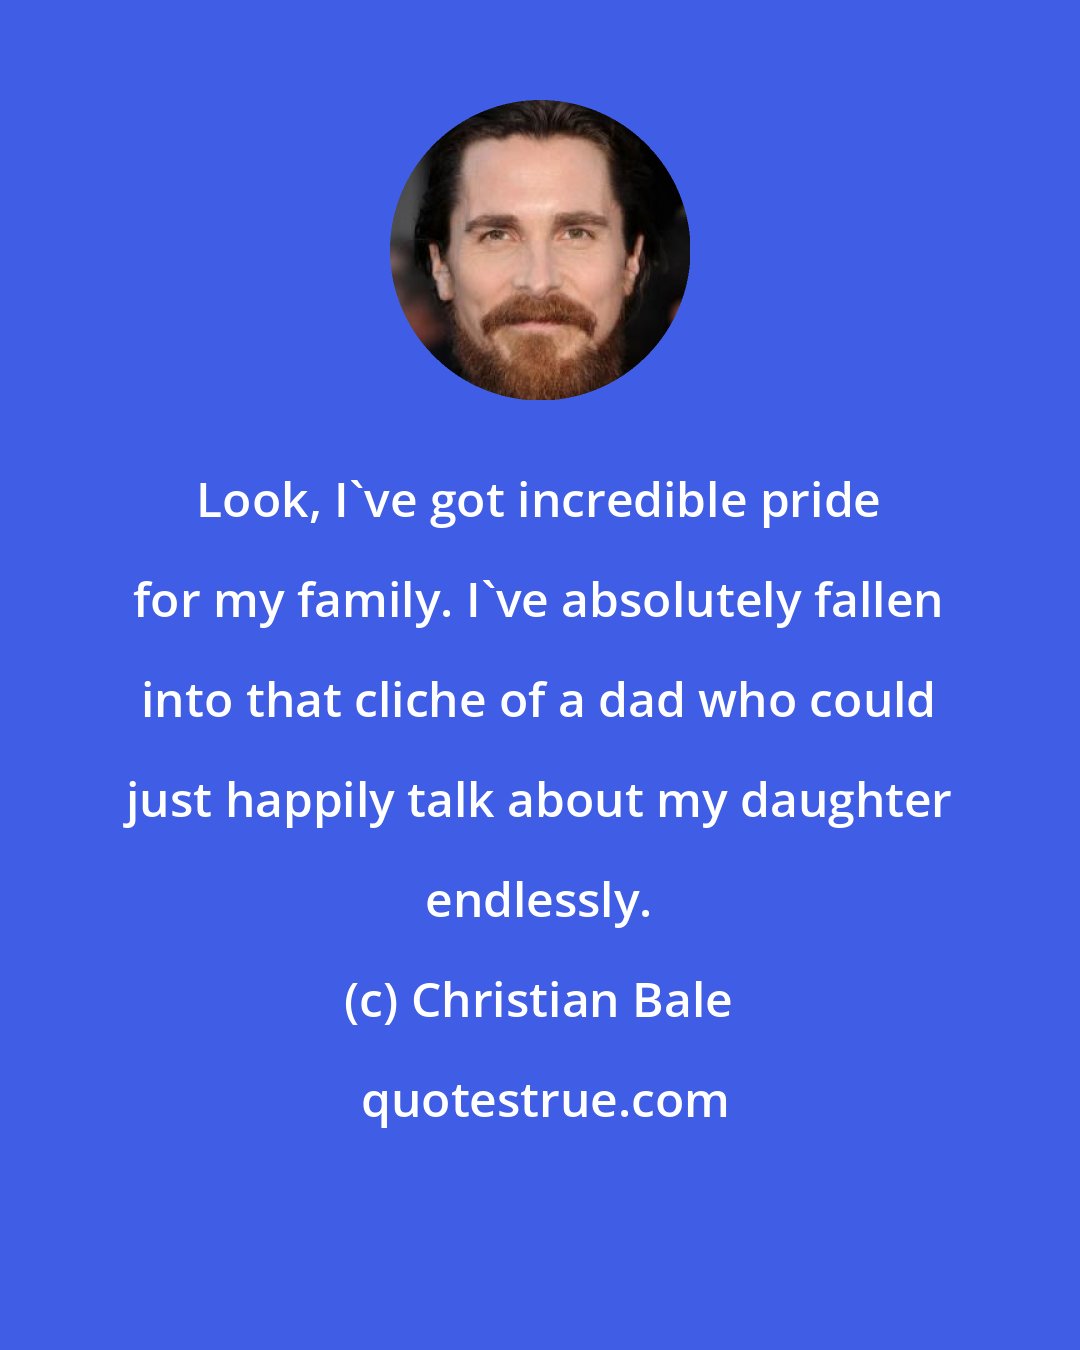 Christian Bale: Look, I've got incredible pride for my family. I've absolutely fallen into that cliche of a dad who could just happily talk about my daughter endlessly.